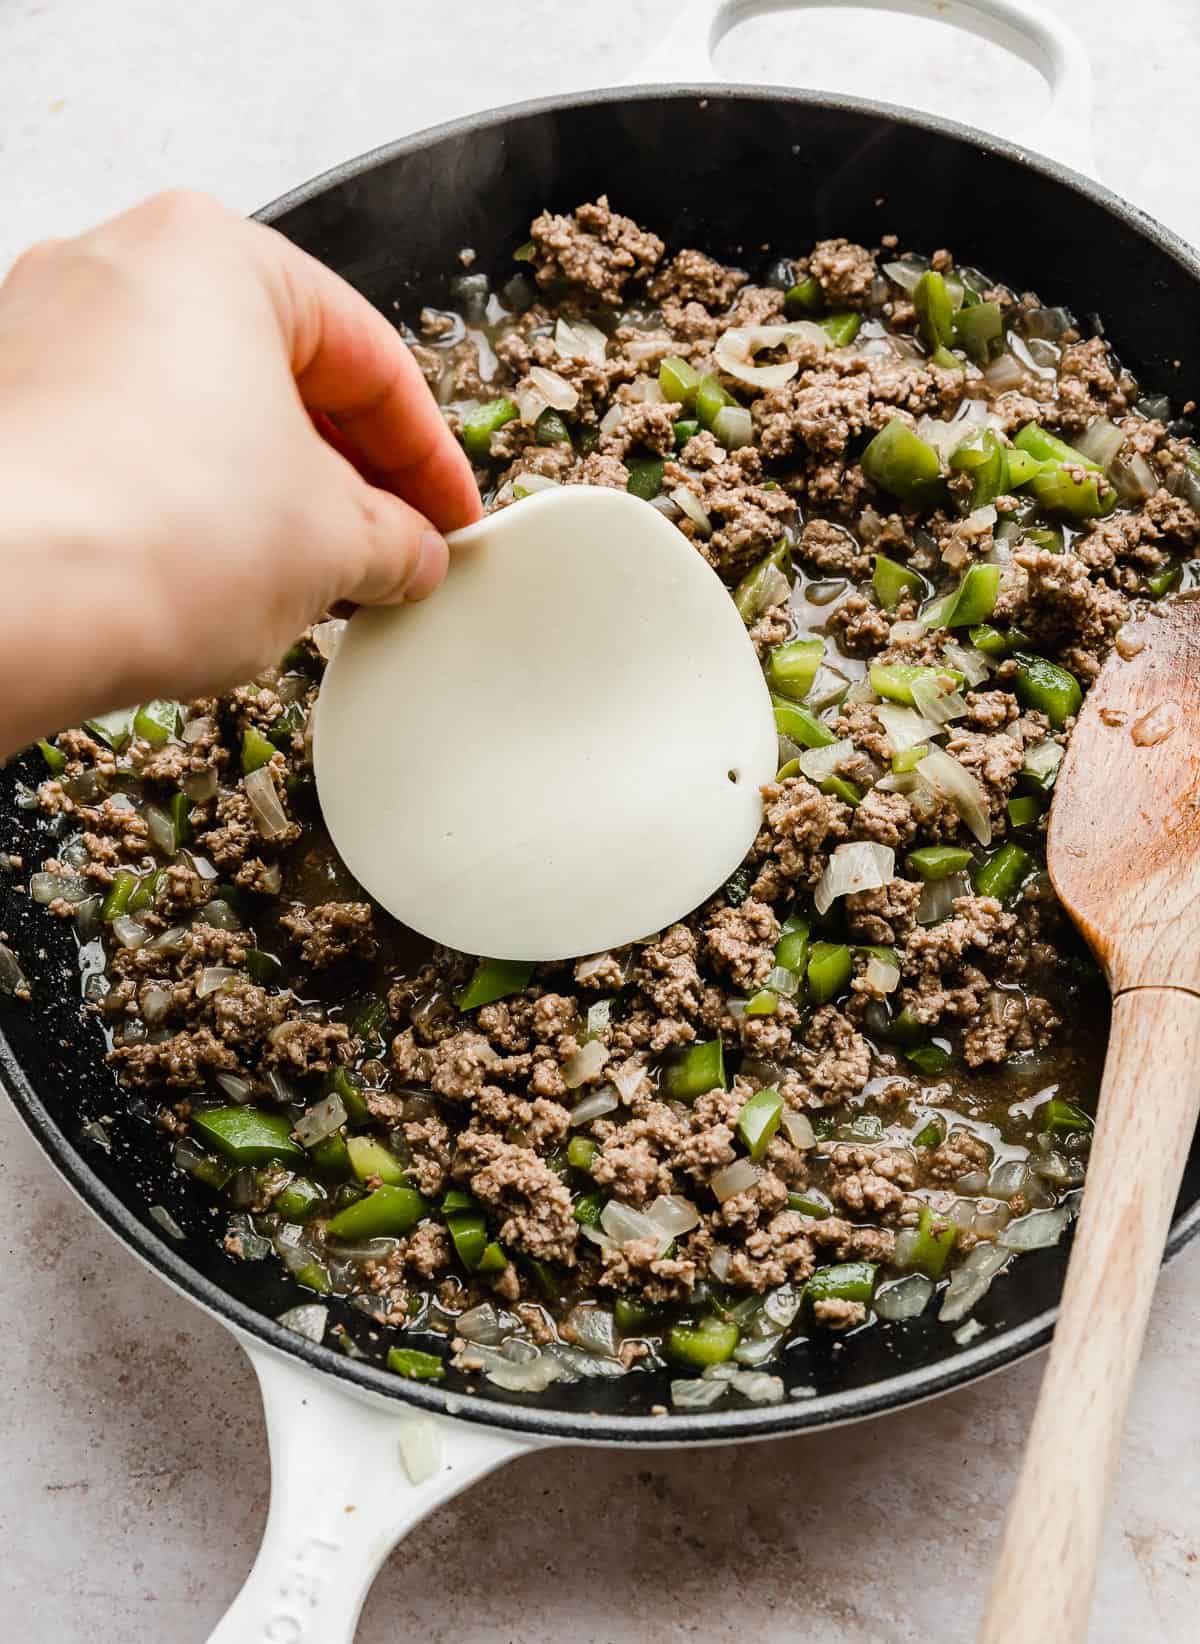 A hand placing a slice of provolone cheese on top of Philly Cheesesteak Sloppy Joes mixture in a skillet.